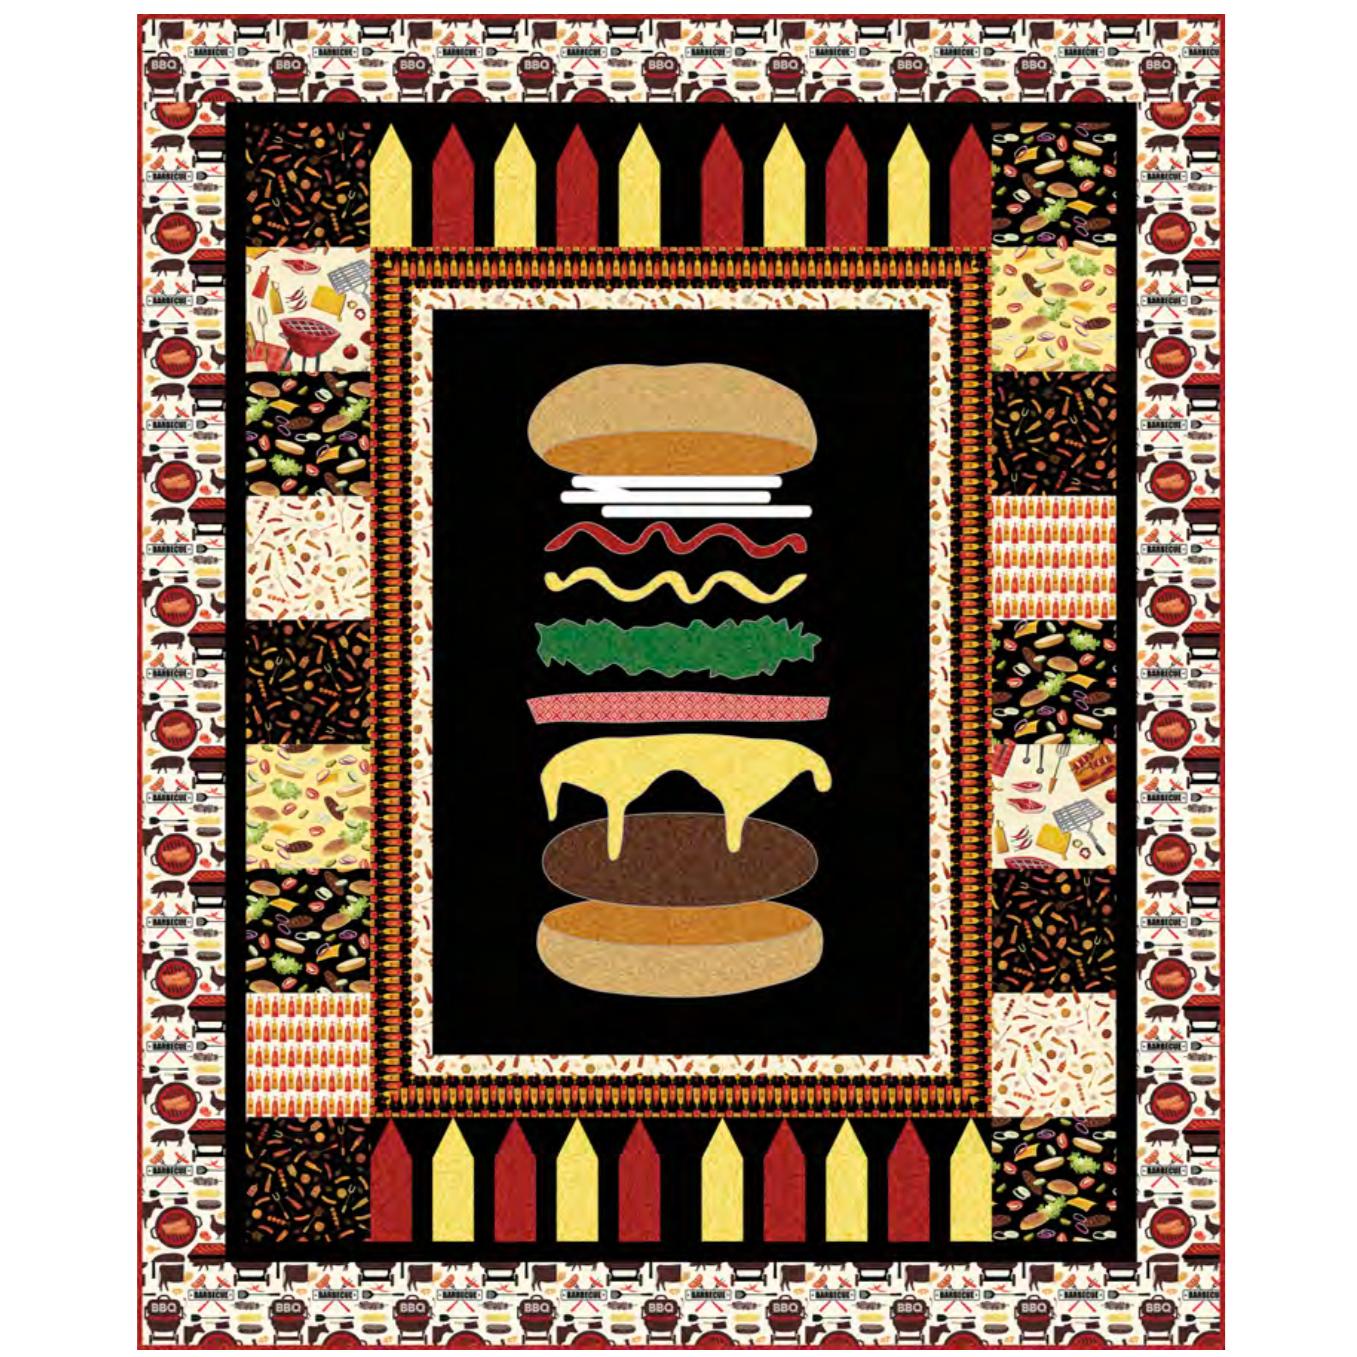 Anatomy of a Burger Quilt Kit